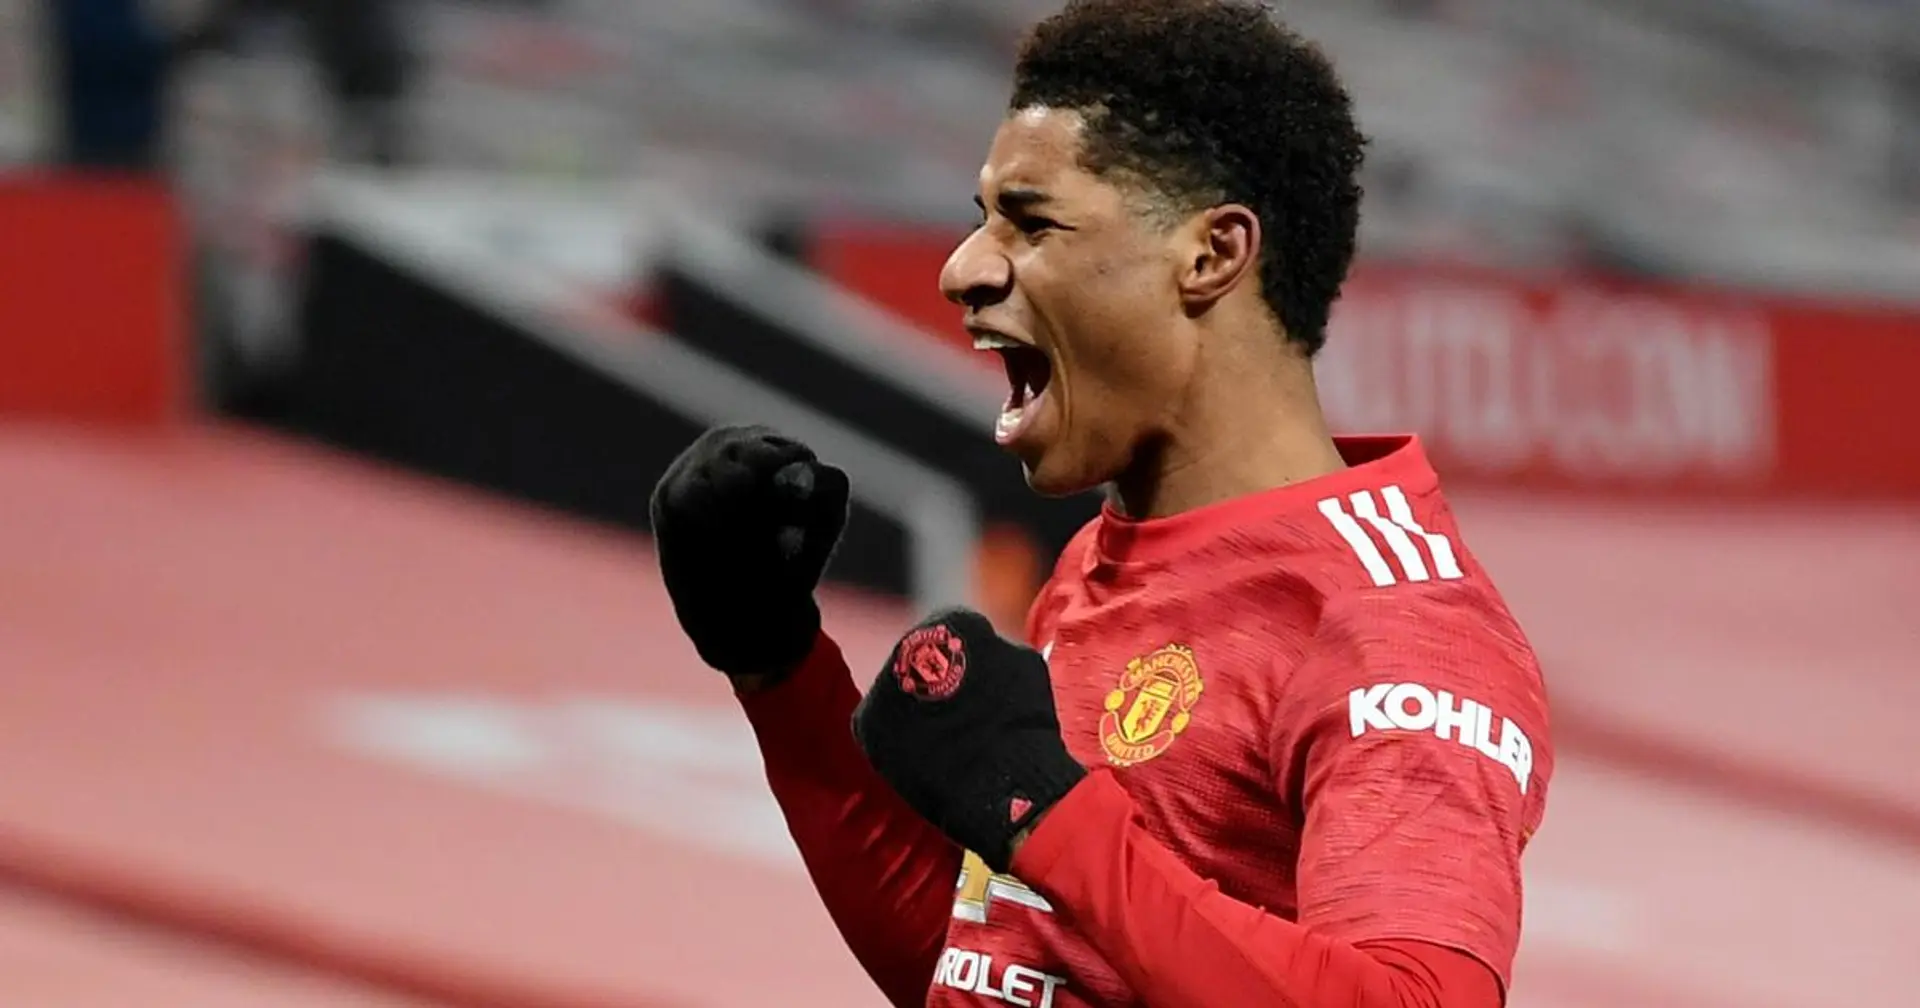 'I wanted to go at him': Marcus Rashford reveals what led to last-minute winner against Wolves